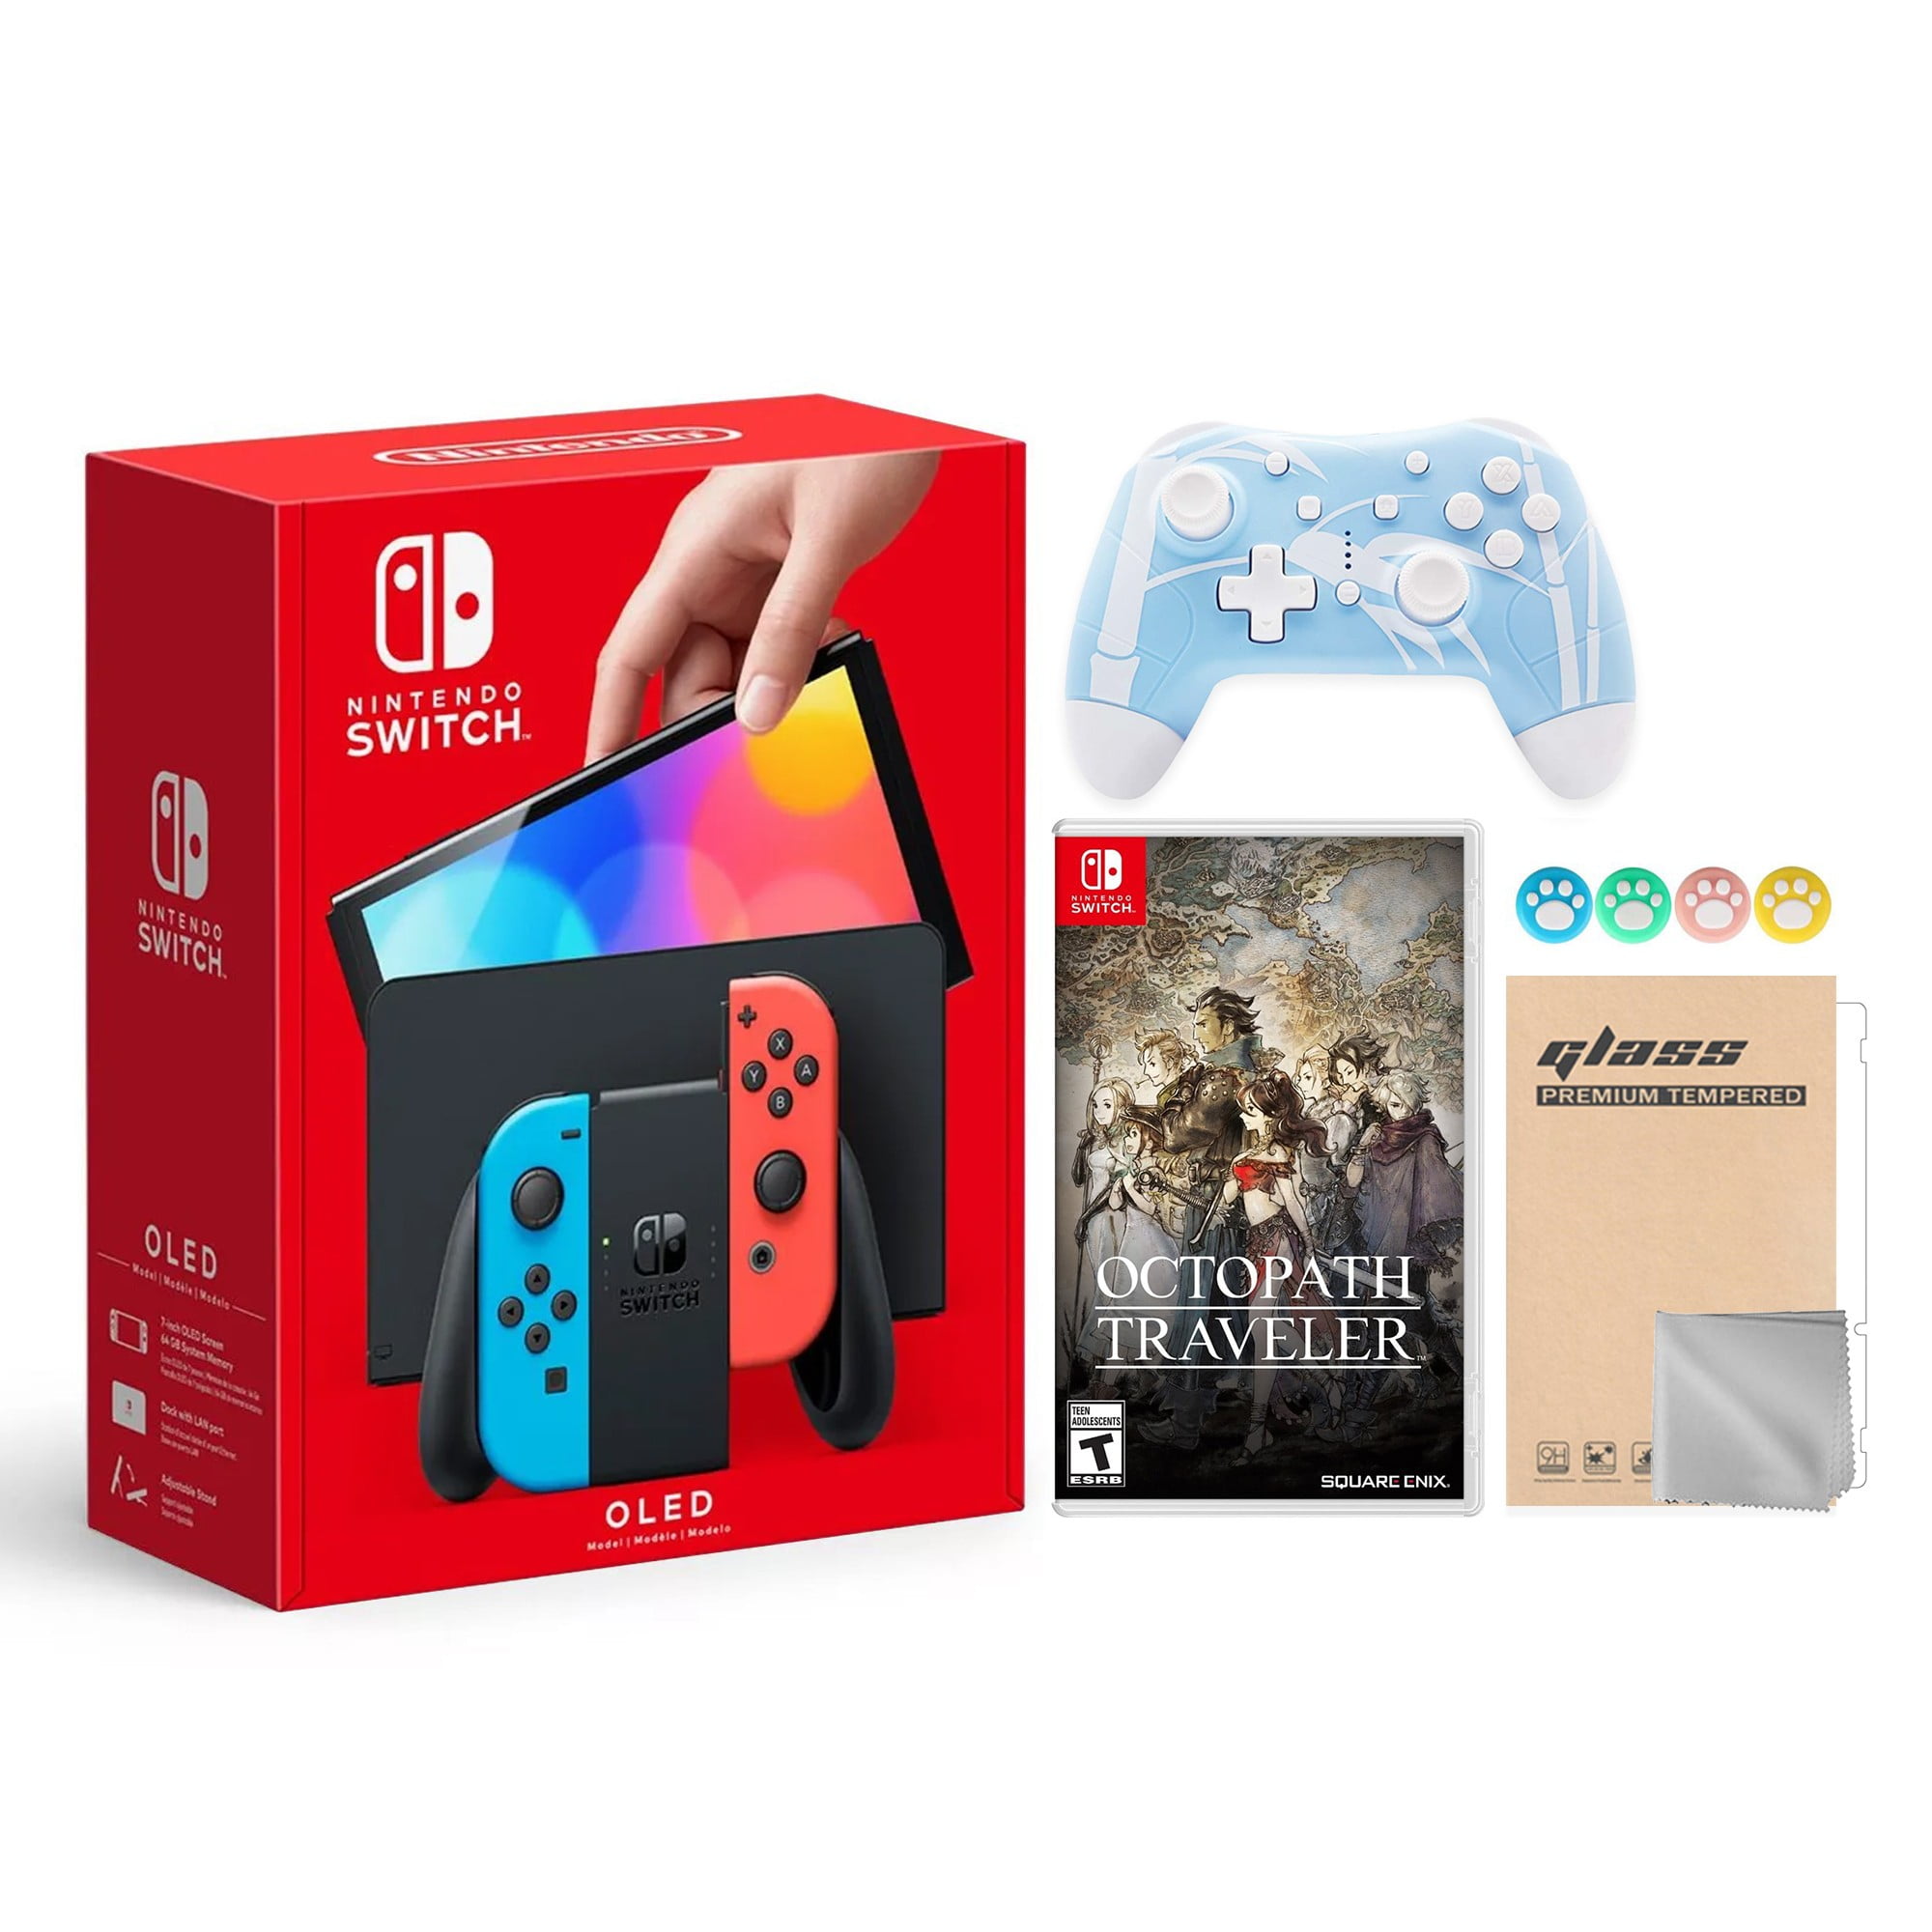 Nintendo Switch OLED Model Neon Red and Blue Joy Con 64GB 